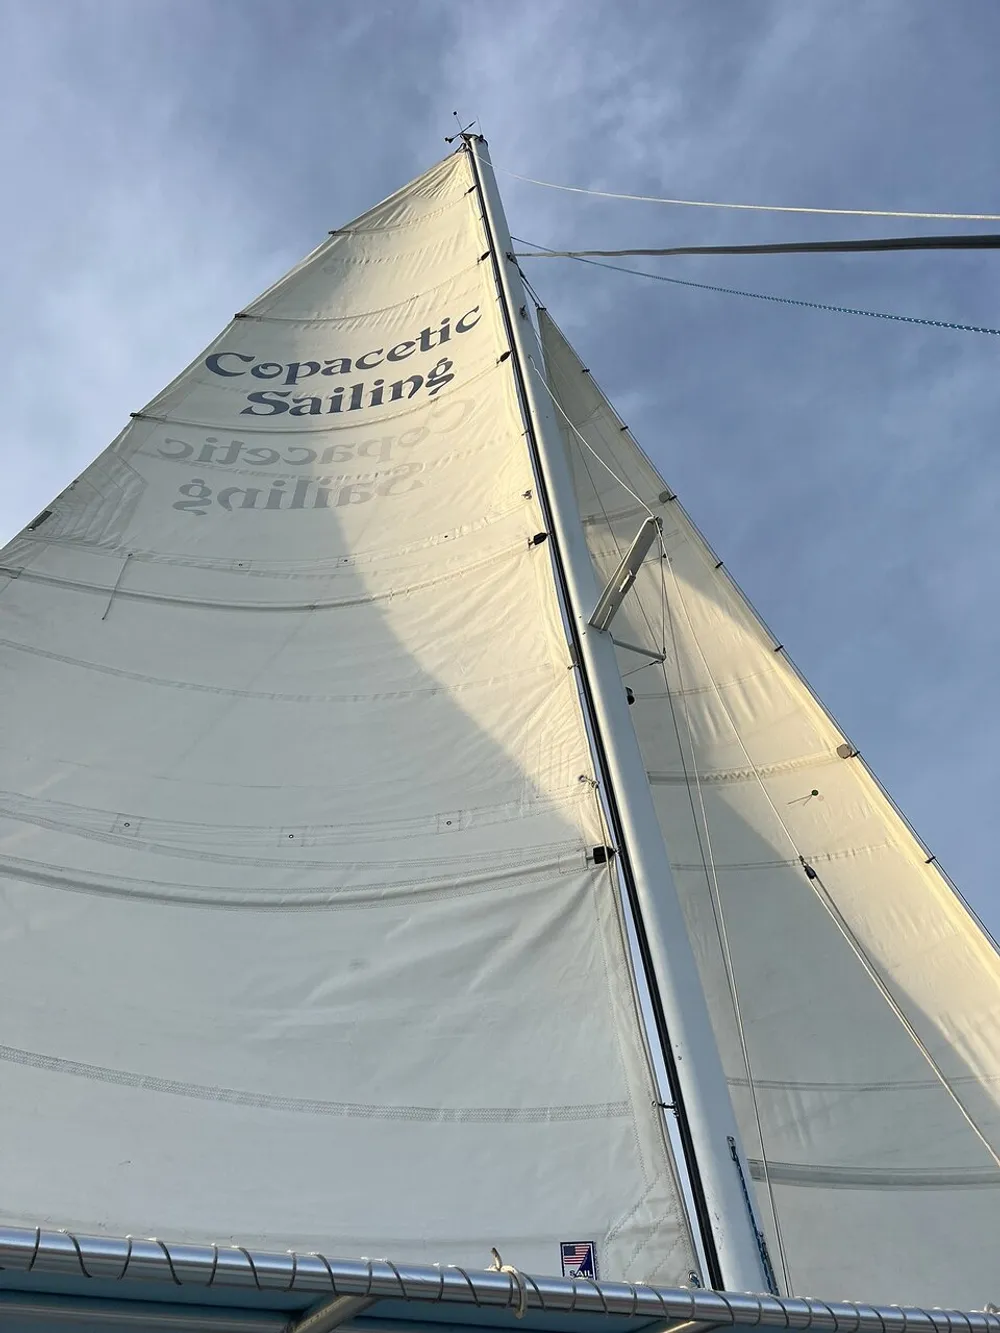 The image showcases the mainsail of a sailboat hoisted up the mast featuring the text Copacetic Sailing against a blue sky